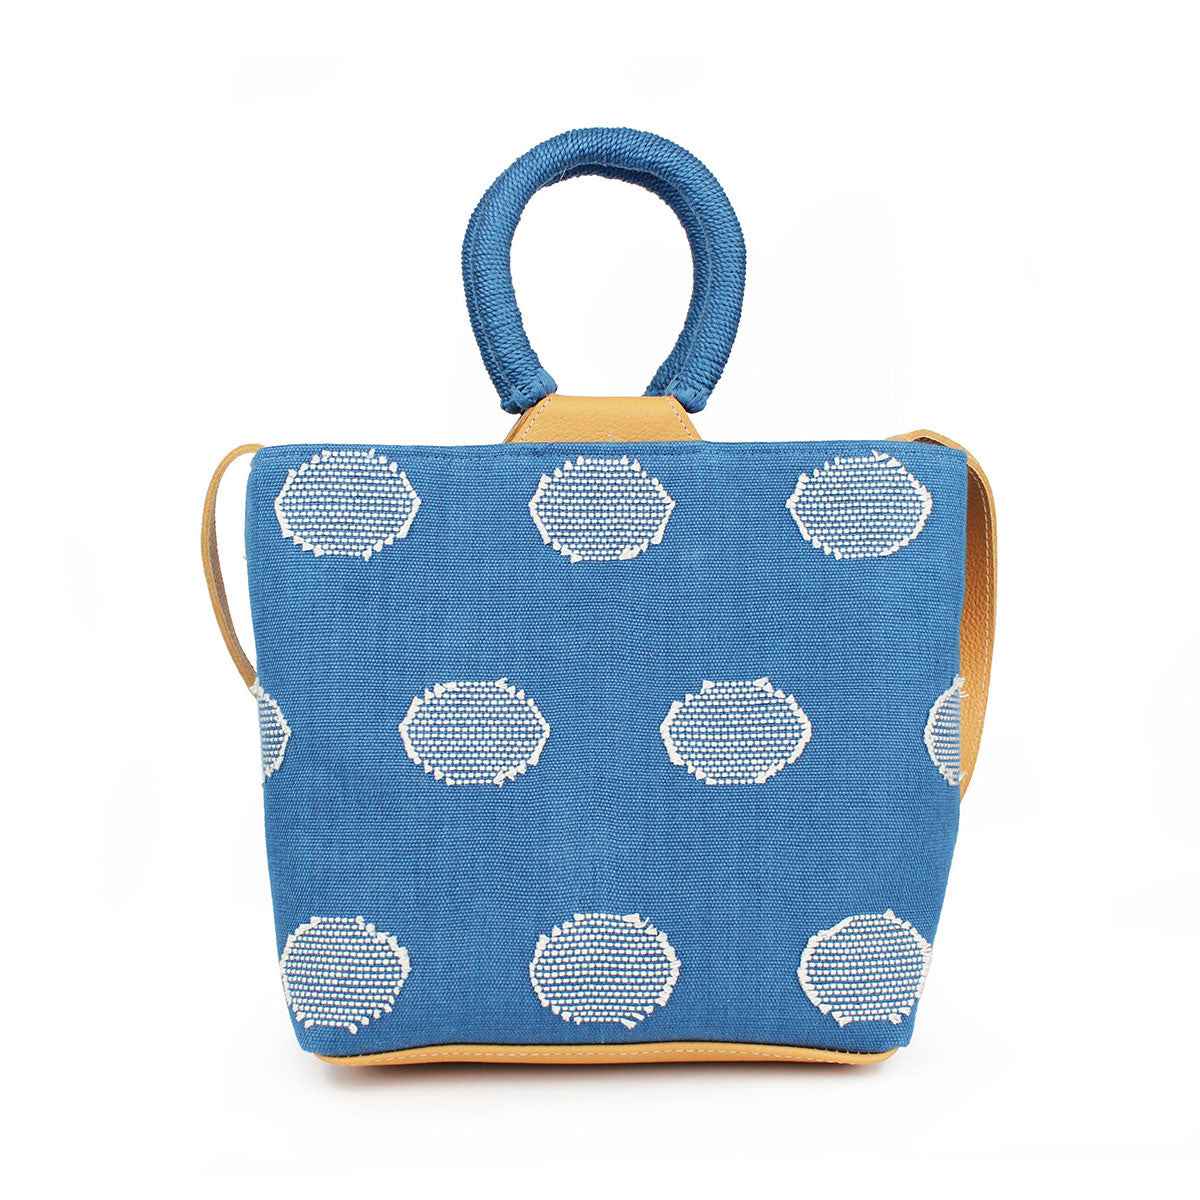 Back of the hand woven artisan Dalila Midi Tote in Ocean Blue. The bag has rounded handles coiled in blue thread. The pattern is the same as the front side, with white circles over a blue background.